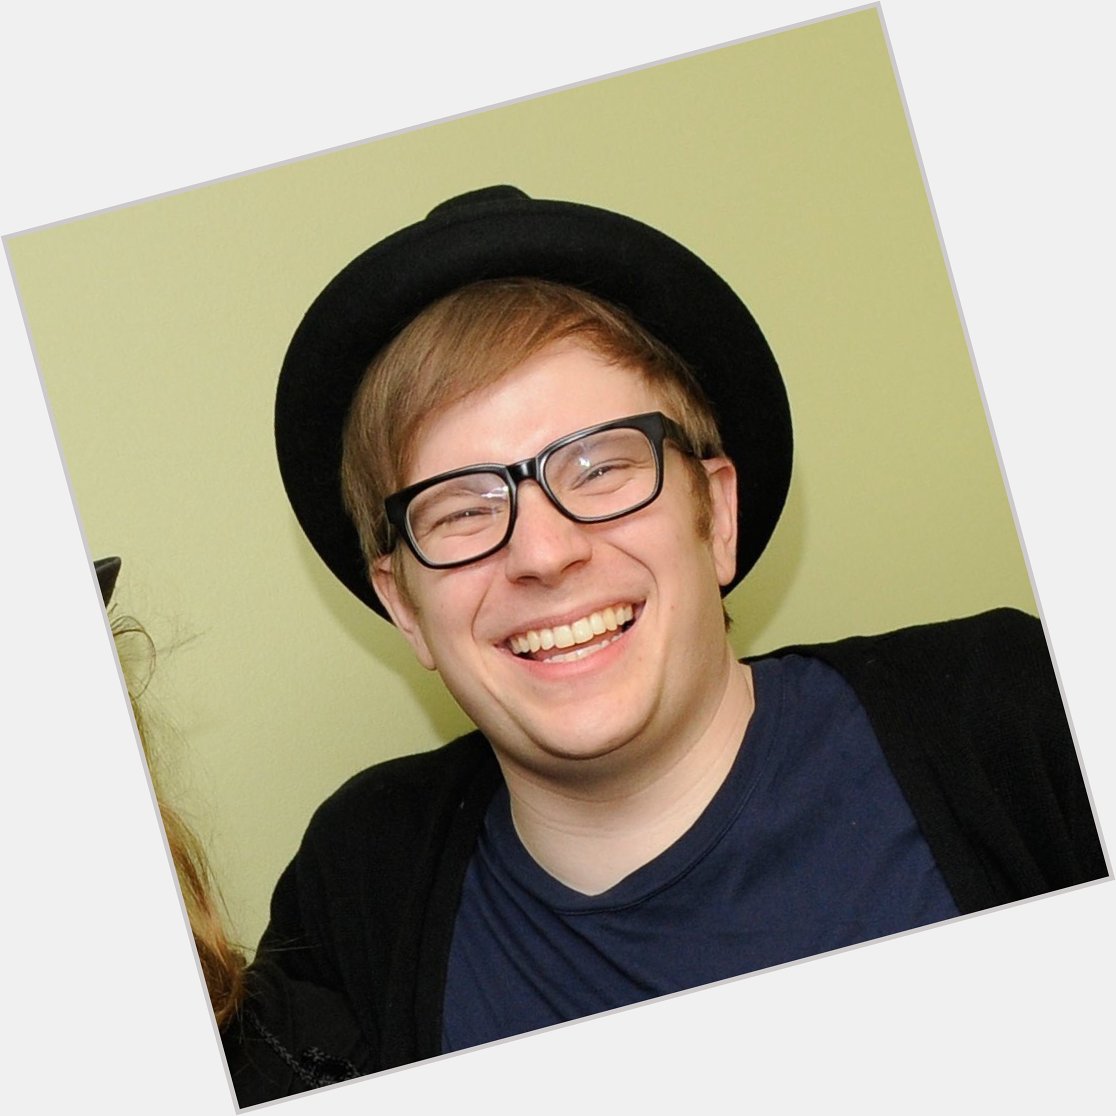 Happy birthday to the lifesaver known as Patrick Stump. You mean the world to me 